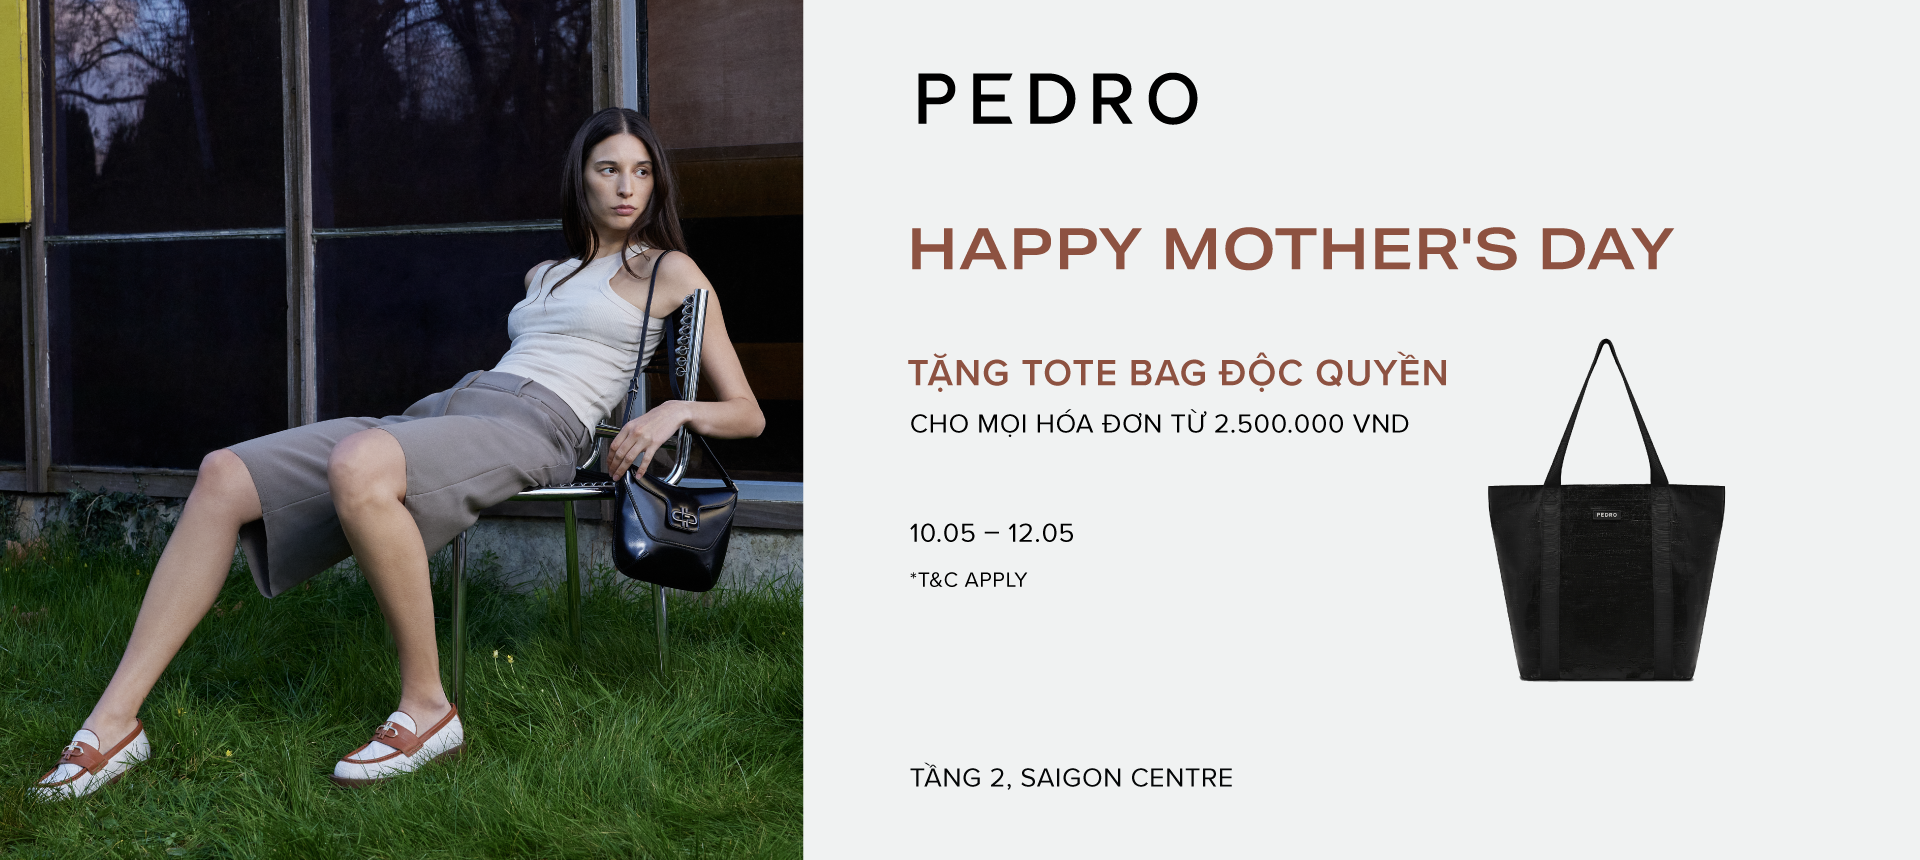 SEND MOTHER'S DAY GRATEFUL GIFTS WITH PEDRO